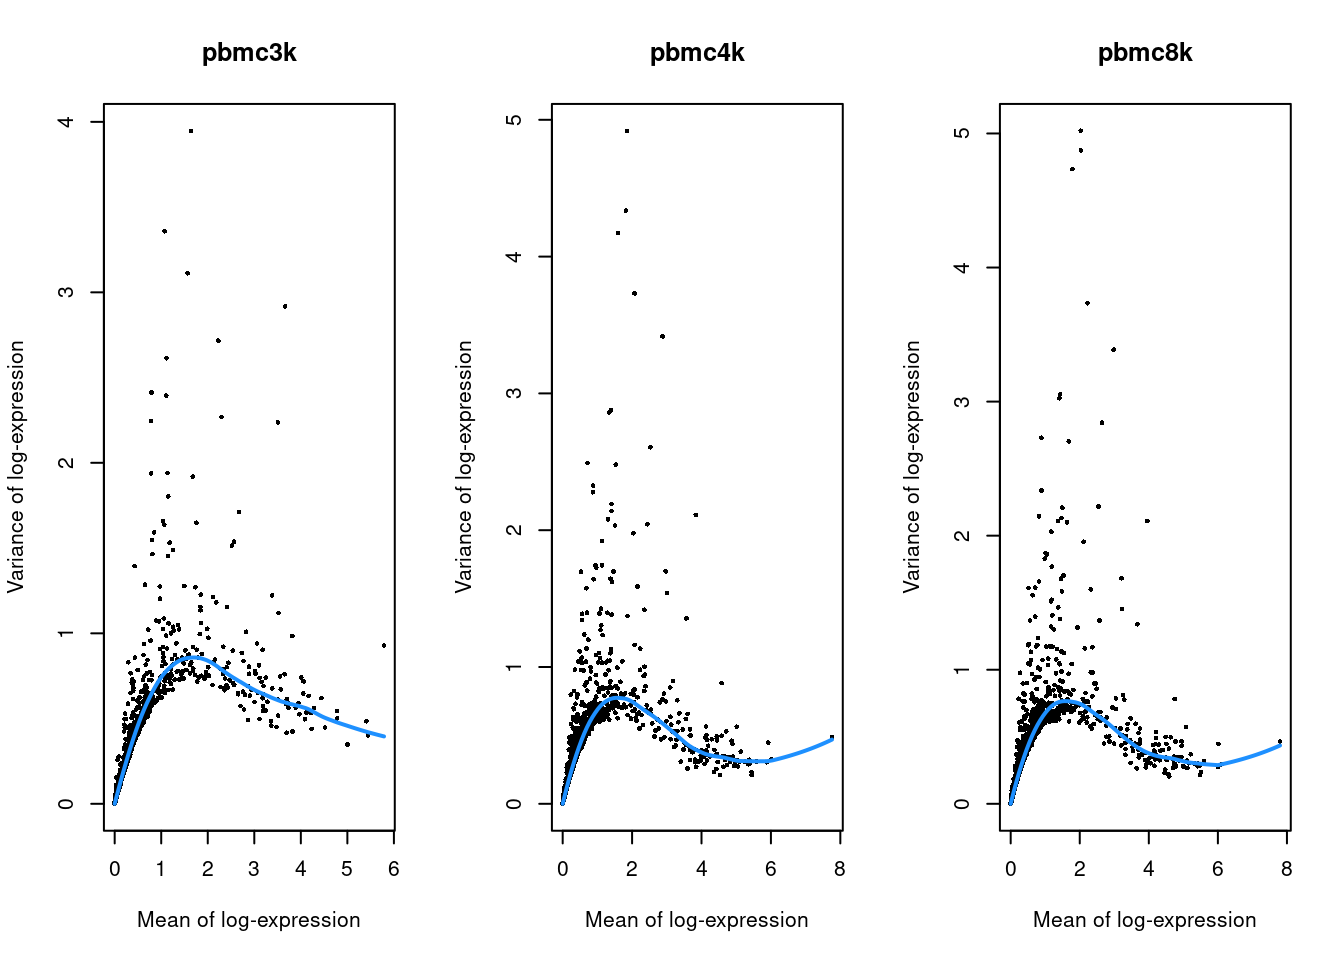 Per-gene variance as a function of the mean for the log-expression values in each PBMC dataset. Each point represents a gene (black) with the mean-variance trend (blue) fitted to the variances.